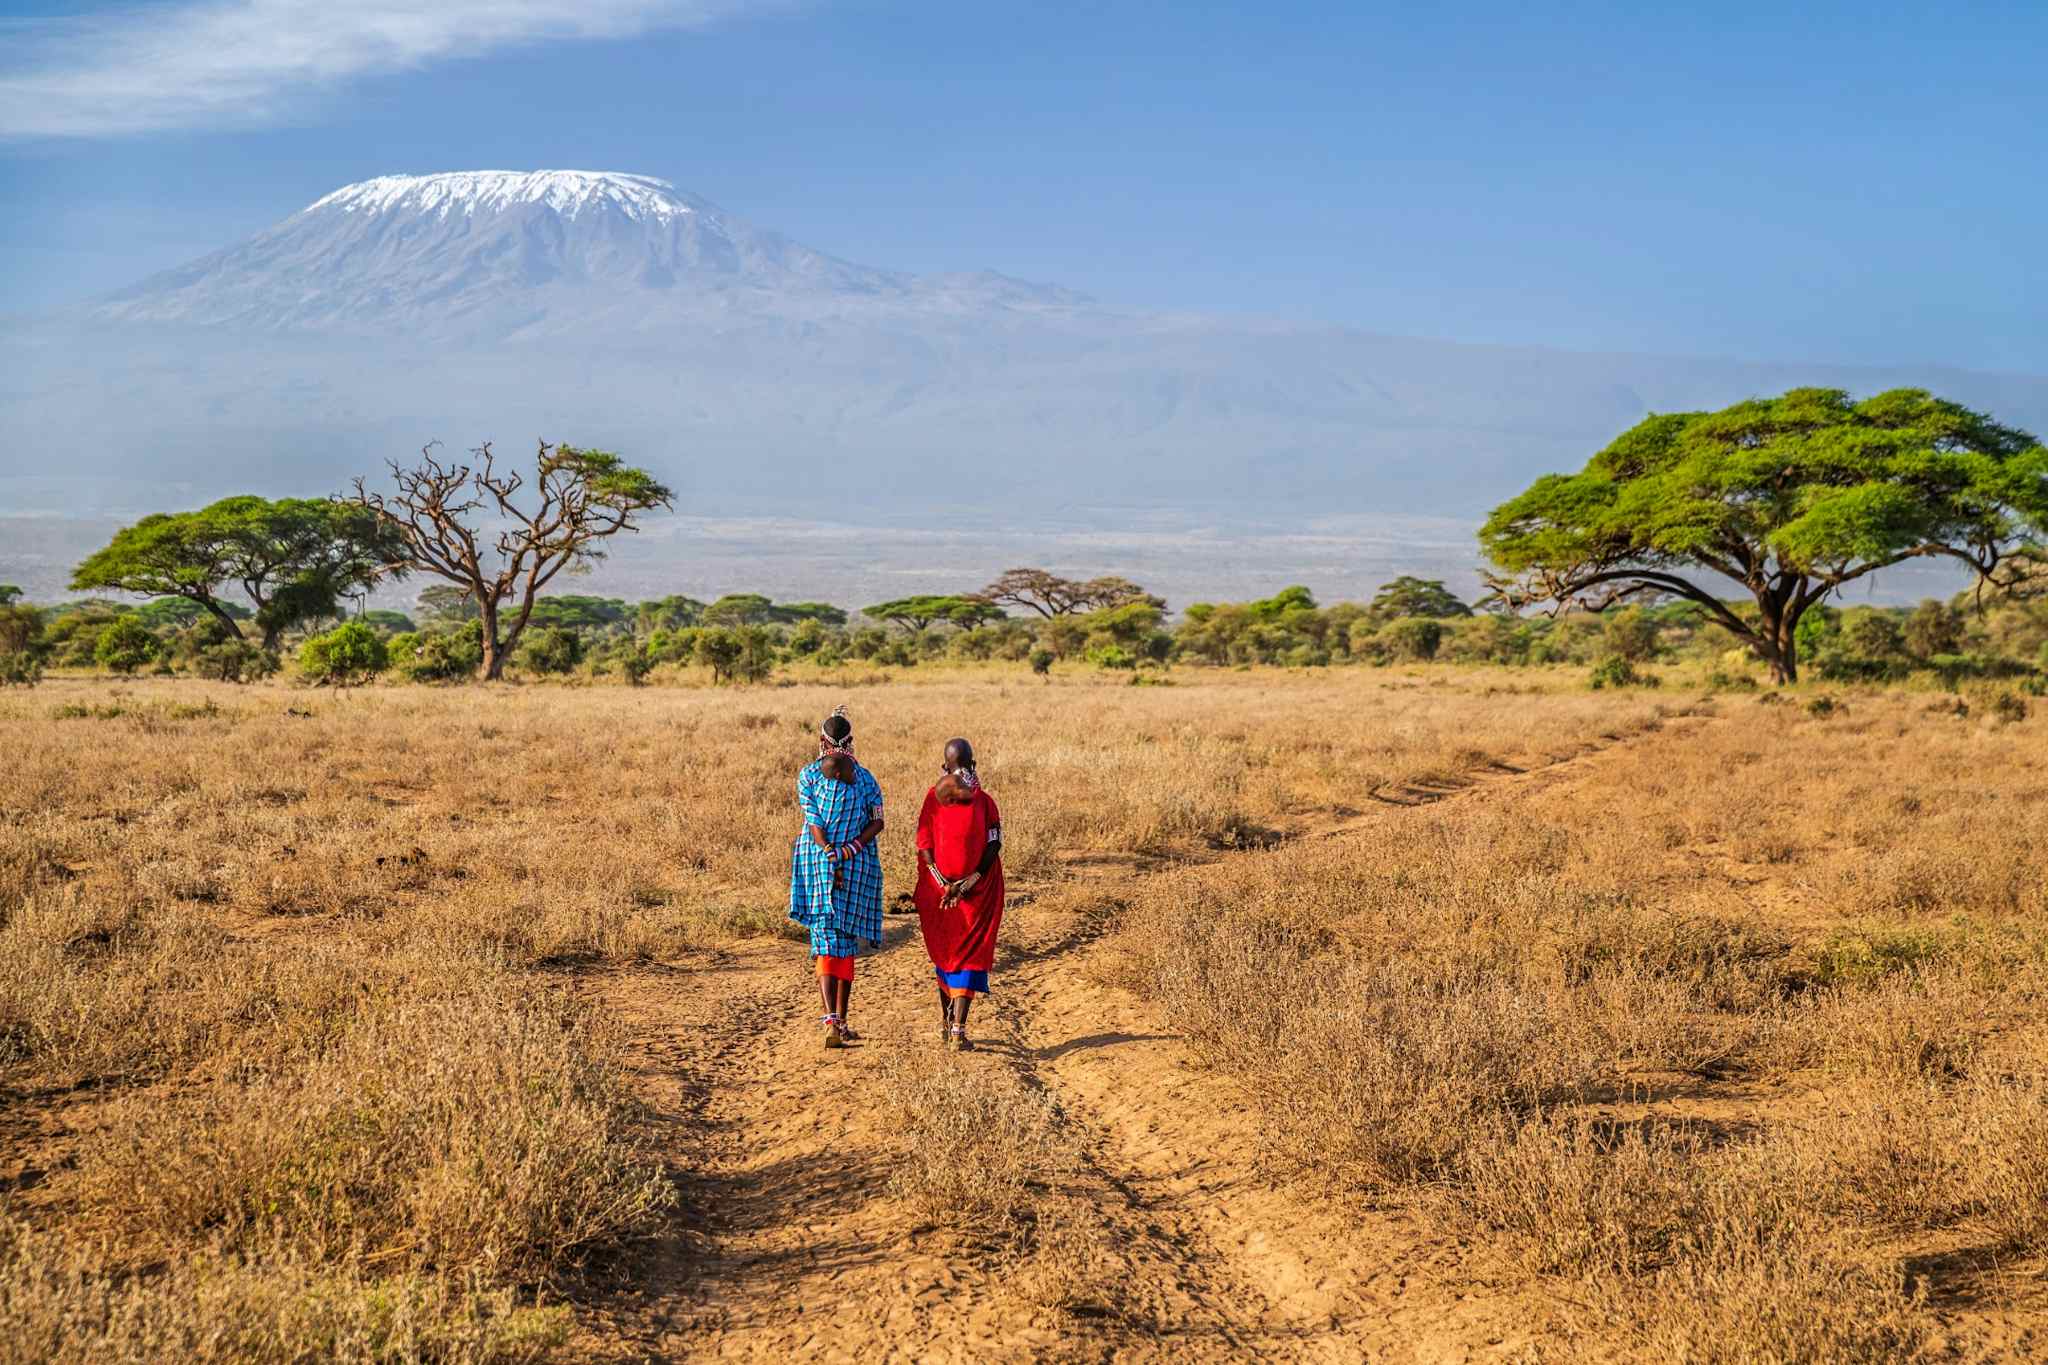 Two Maasai walking on a track through the Tanzanian savannah with Mount Kilimanjaro in the background.